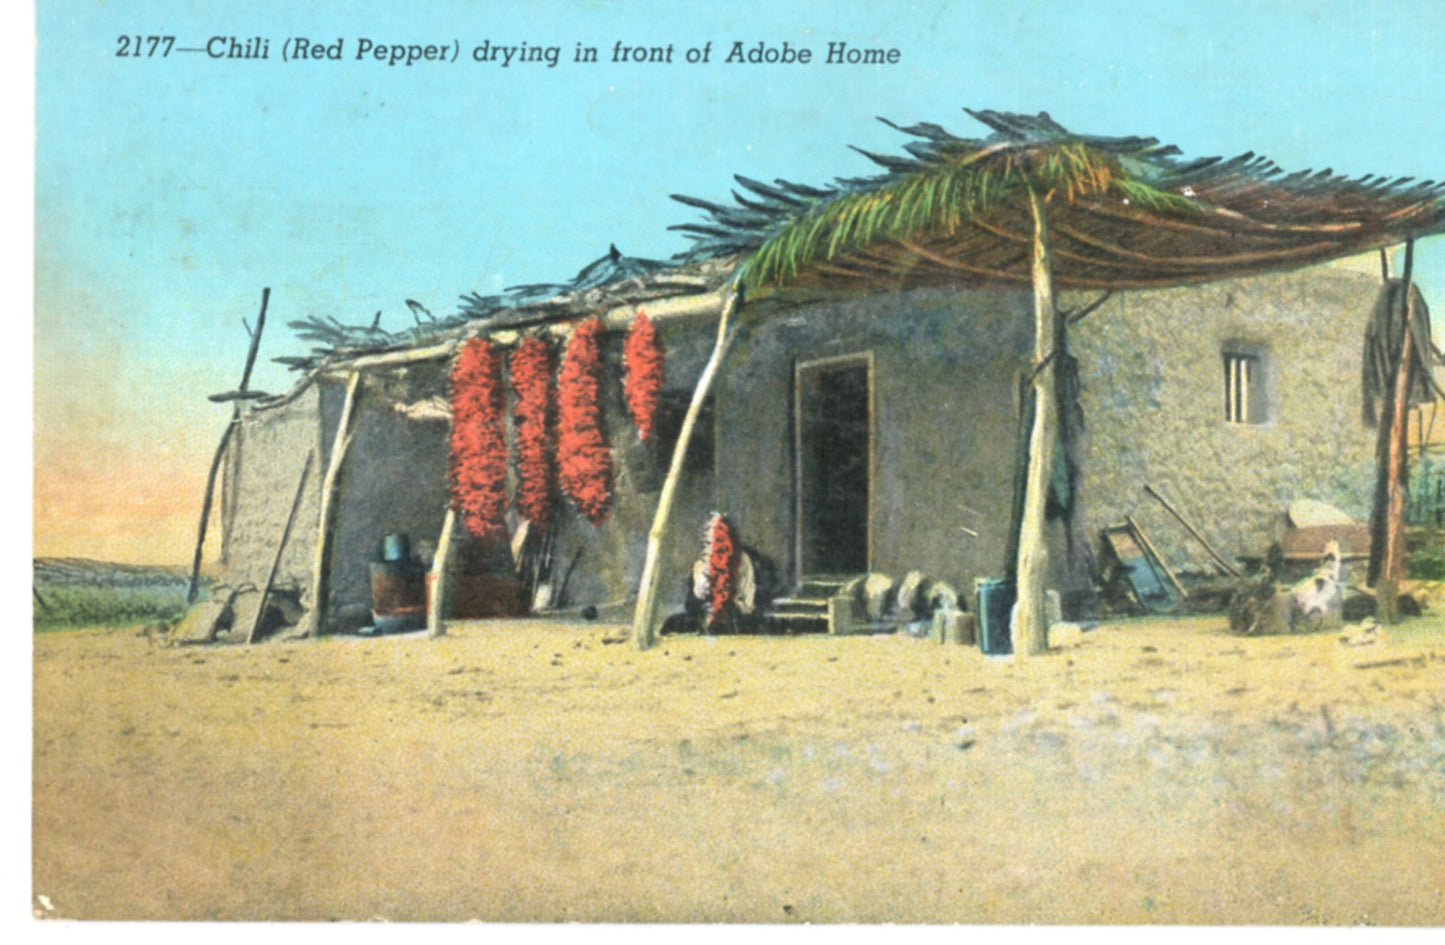 Chili Red Pepper Drying Adobe Home AMERICAN SOUTHWEST Vintage Linen Postcard